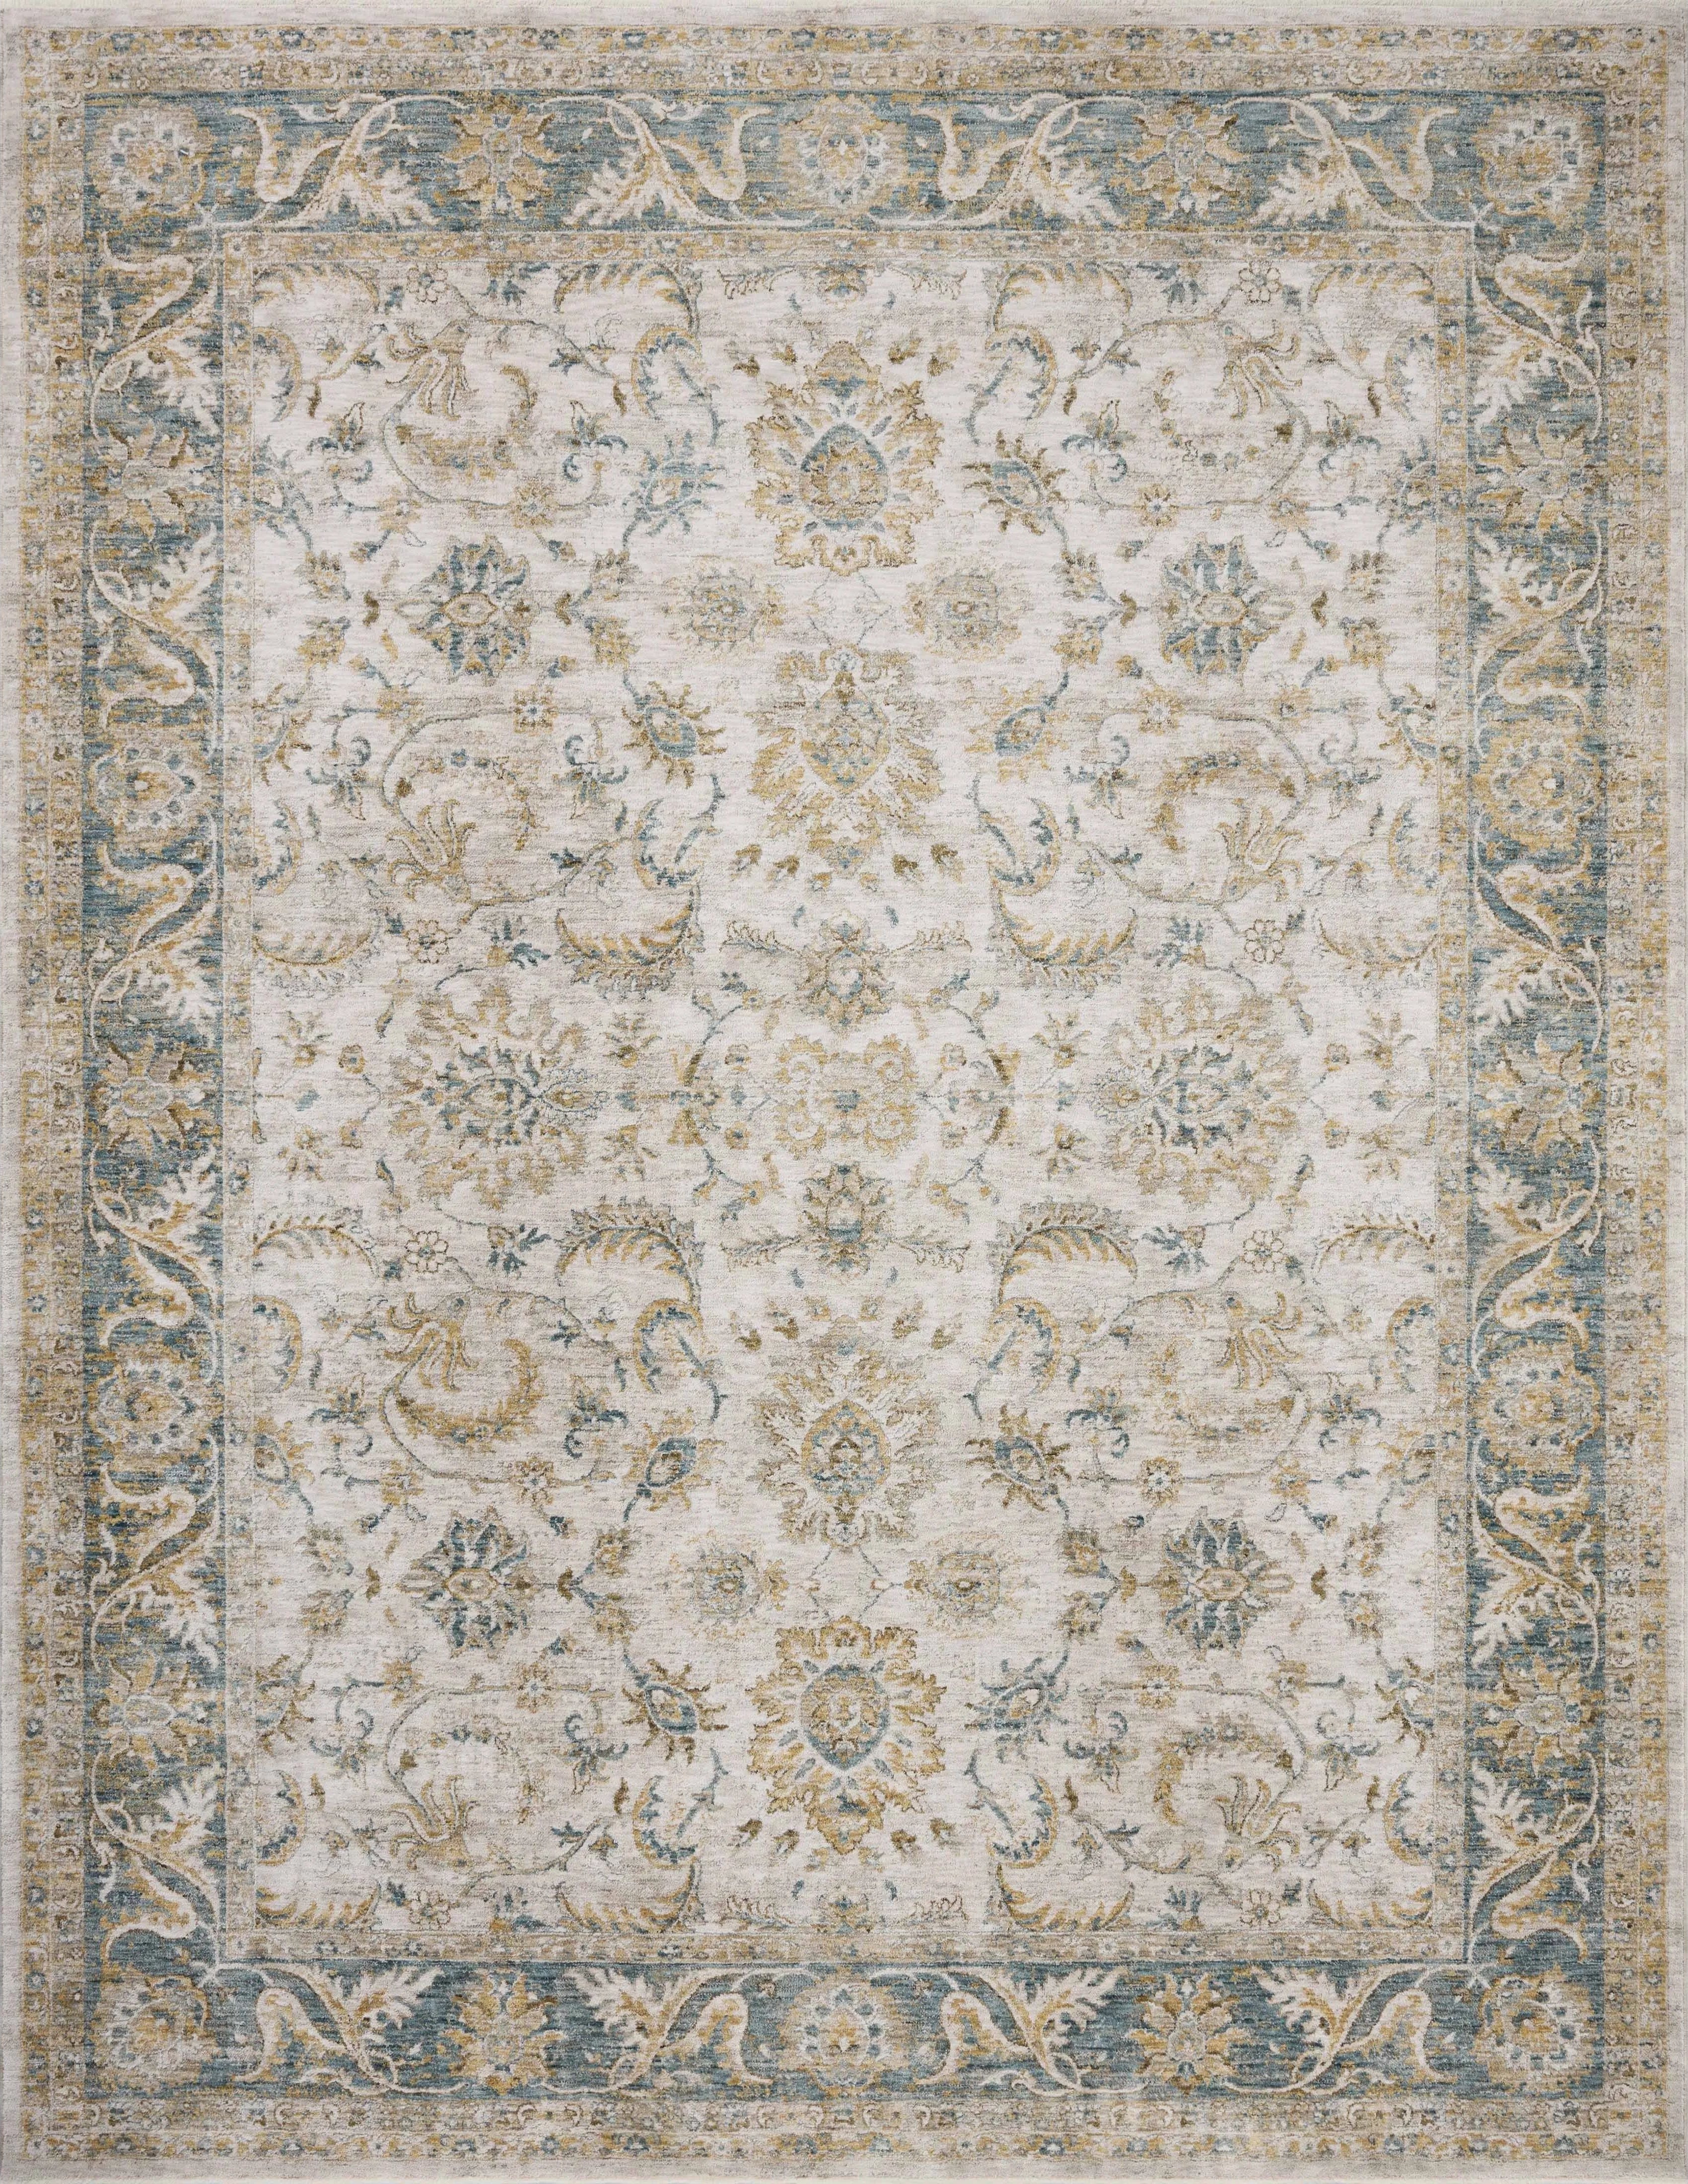 Power-loomed in Turkey of 100% polyester pile, the Gaia Natural / Ocean Rug displays a classic color palette and a mix of abstract and traditional-inspired motifs. With a variation of warm and cool tones, mix of modern and classic designs, Gaia offers an option for all types of styles Amethyst Home provides interior design, new home construction design consulting, vintage area rugs, and lighting in the Charlotte metro area.